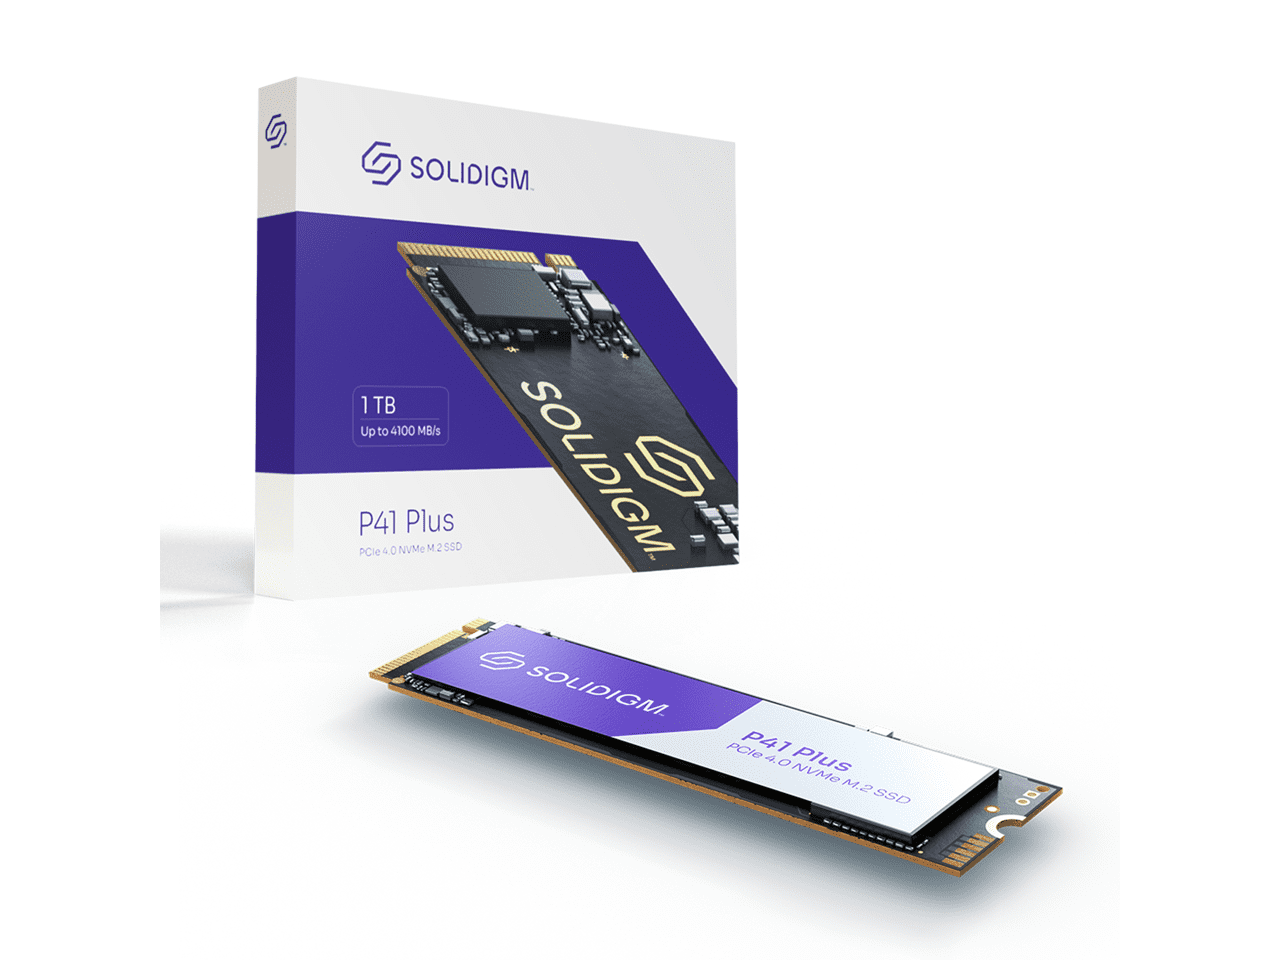 fanxiang S770 1TB SSD PCIe 4.0 NVMe SSD M.2 2280 Internal Solid